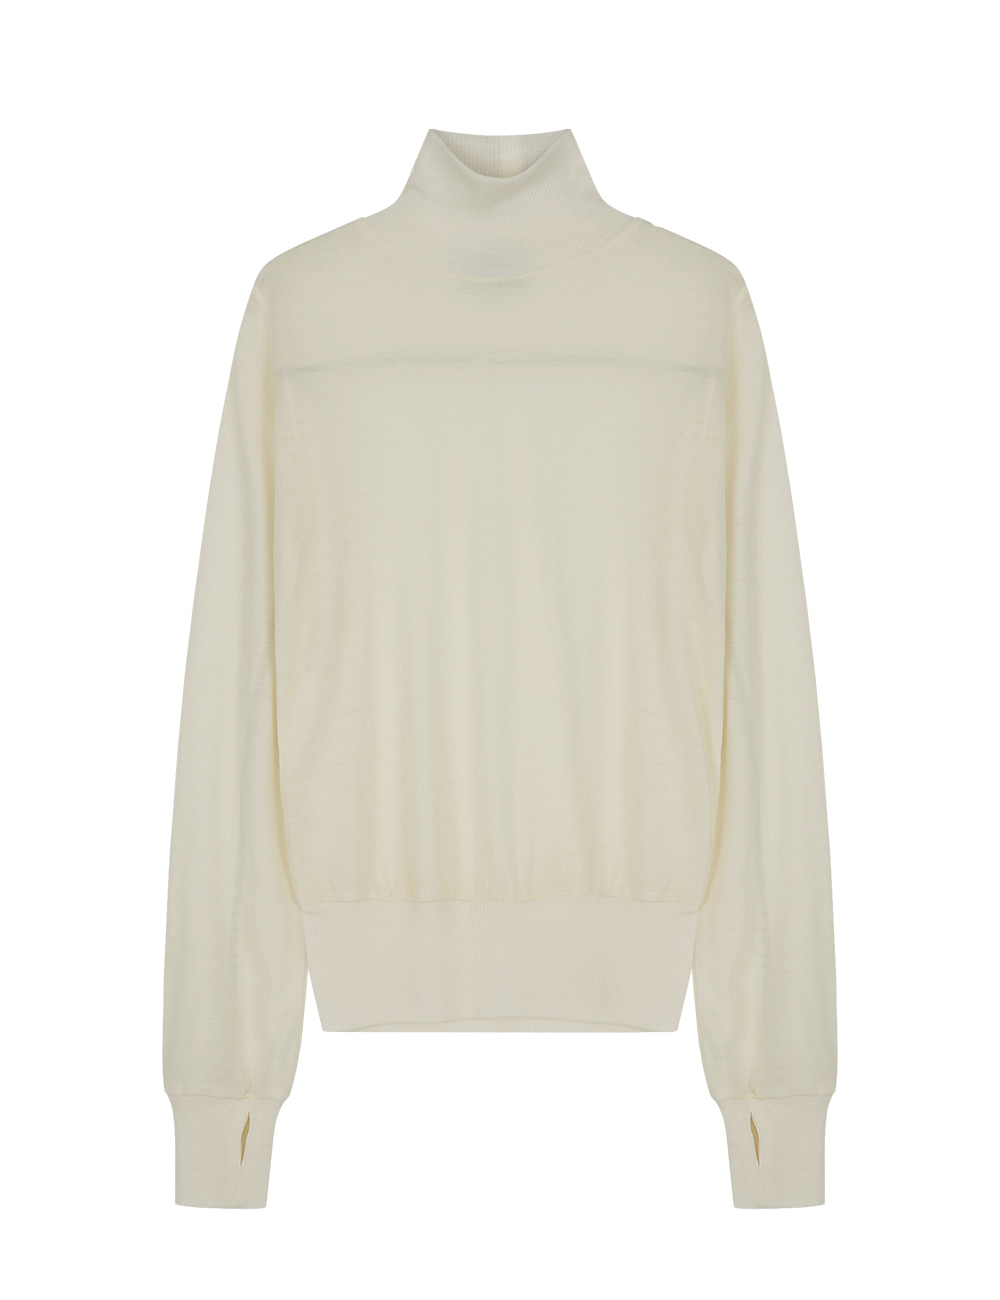 COVER STITCH WOOL JERSEY MOCK NECK TOP (IVORY)